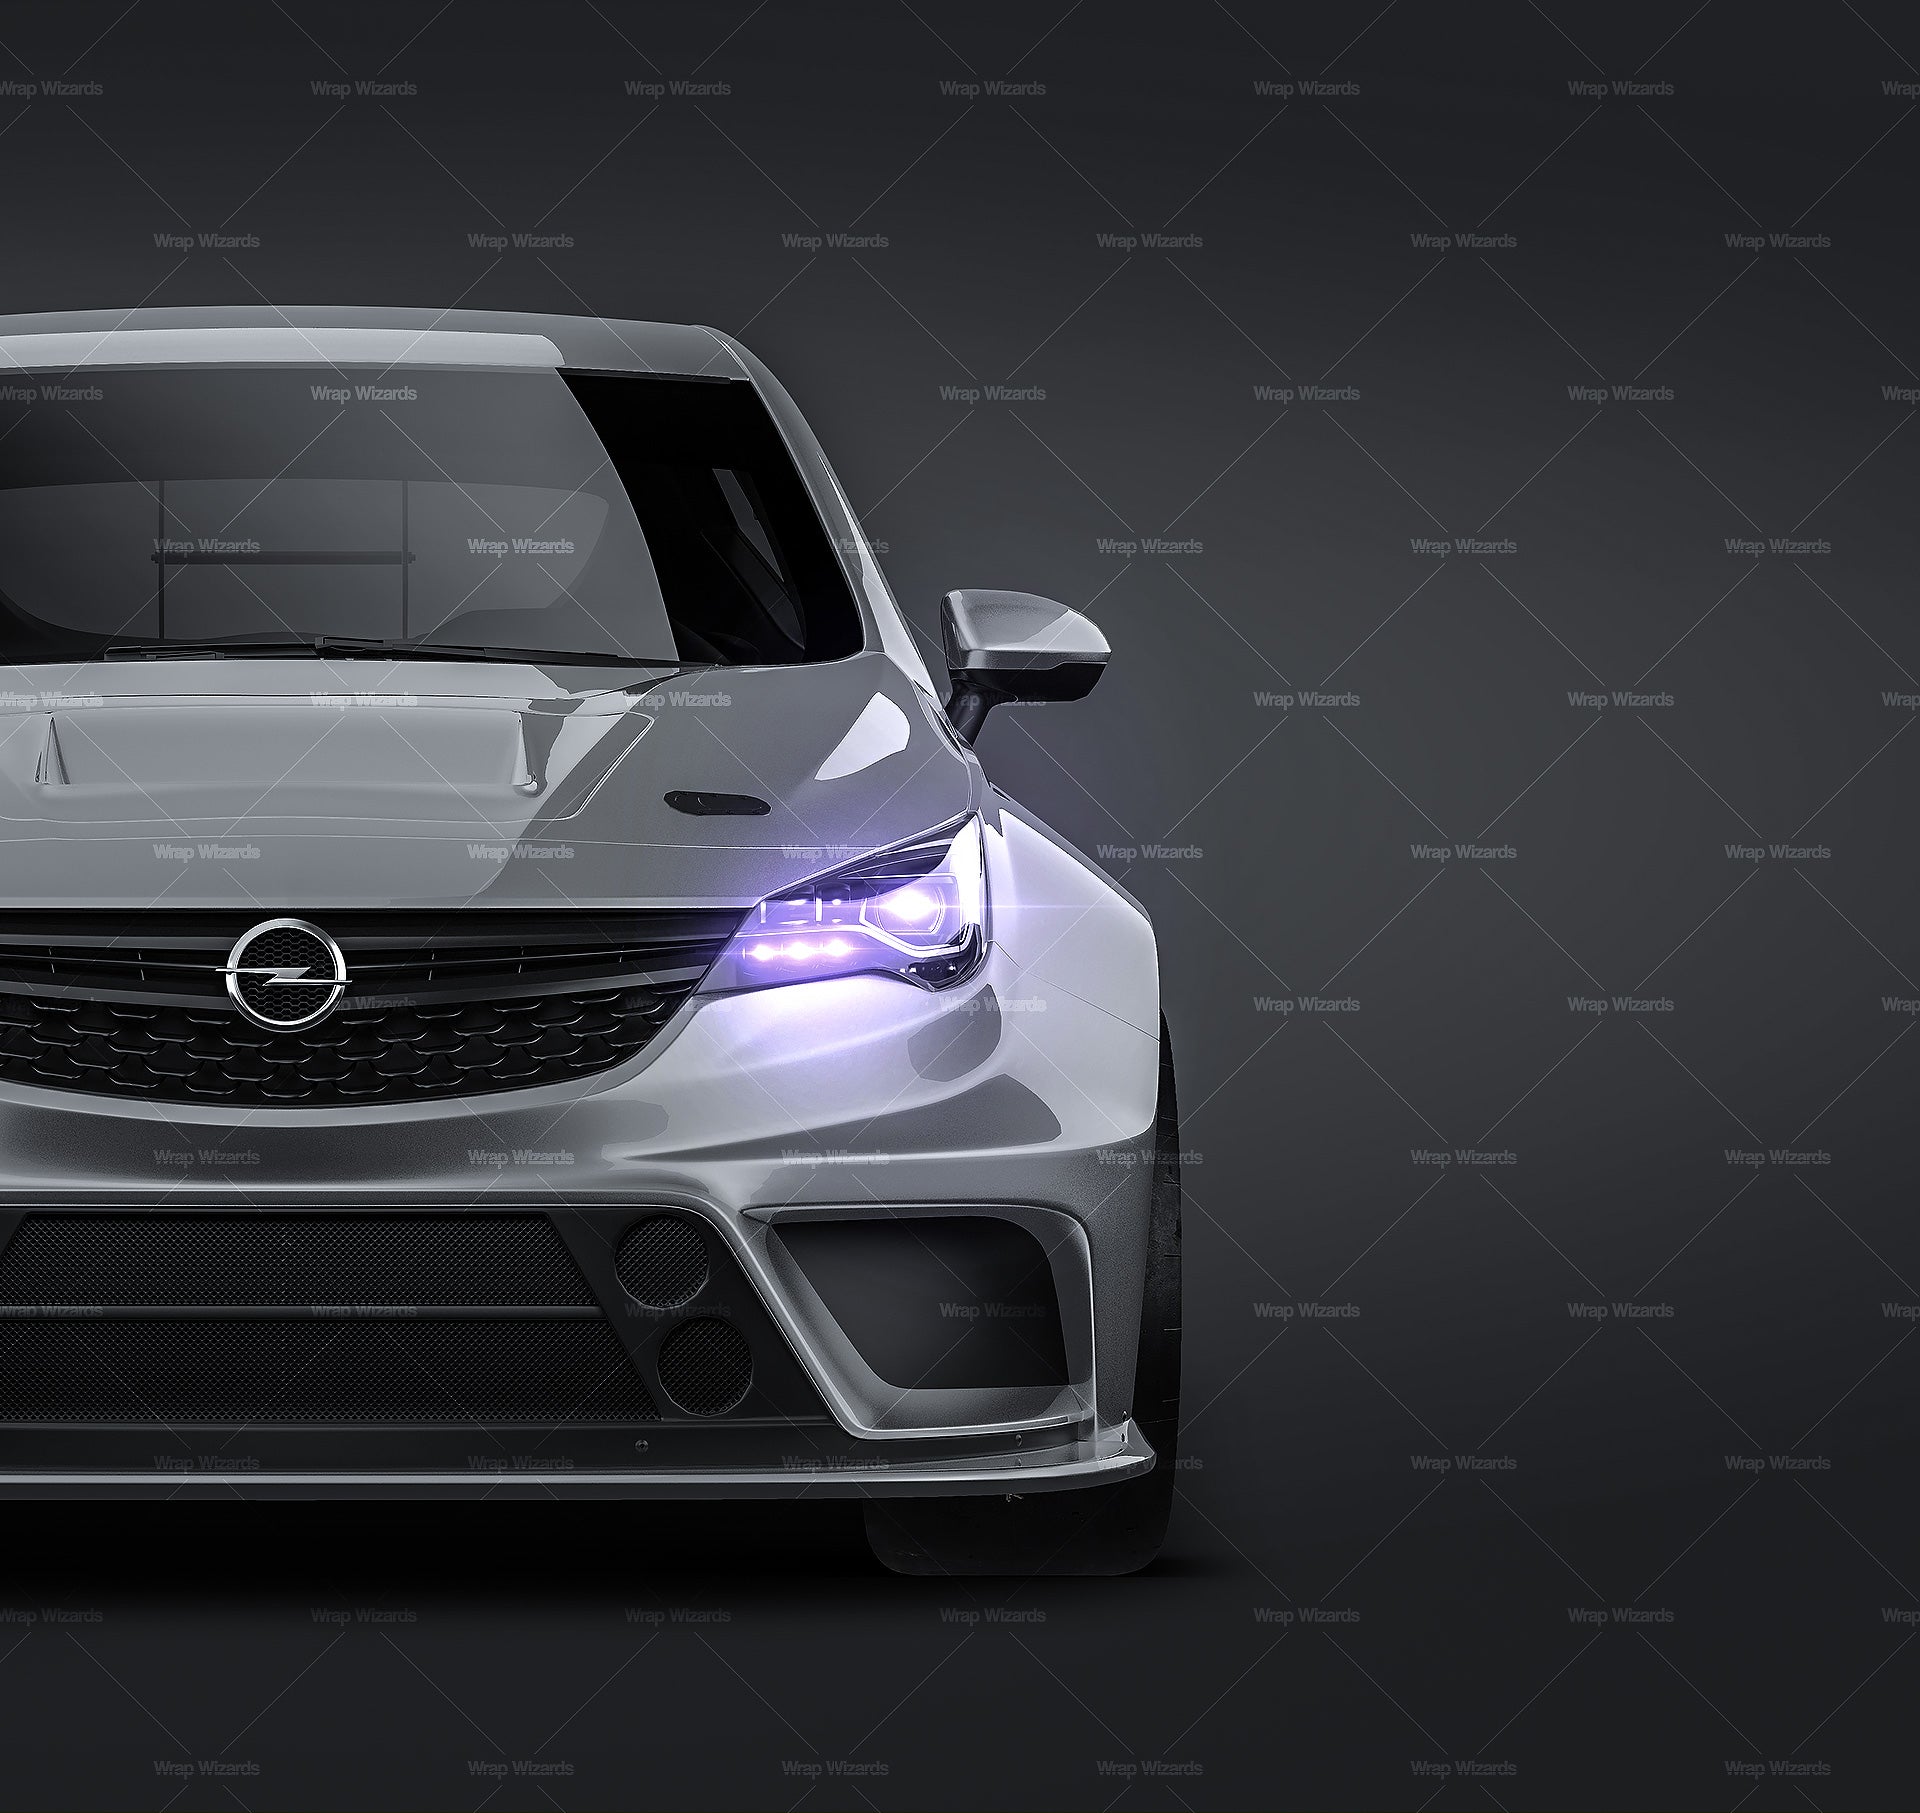 Opel Astra TCR glossy finish - all sides Car Mockup Template.psd